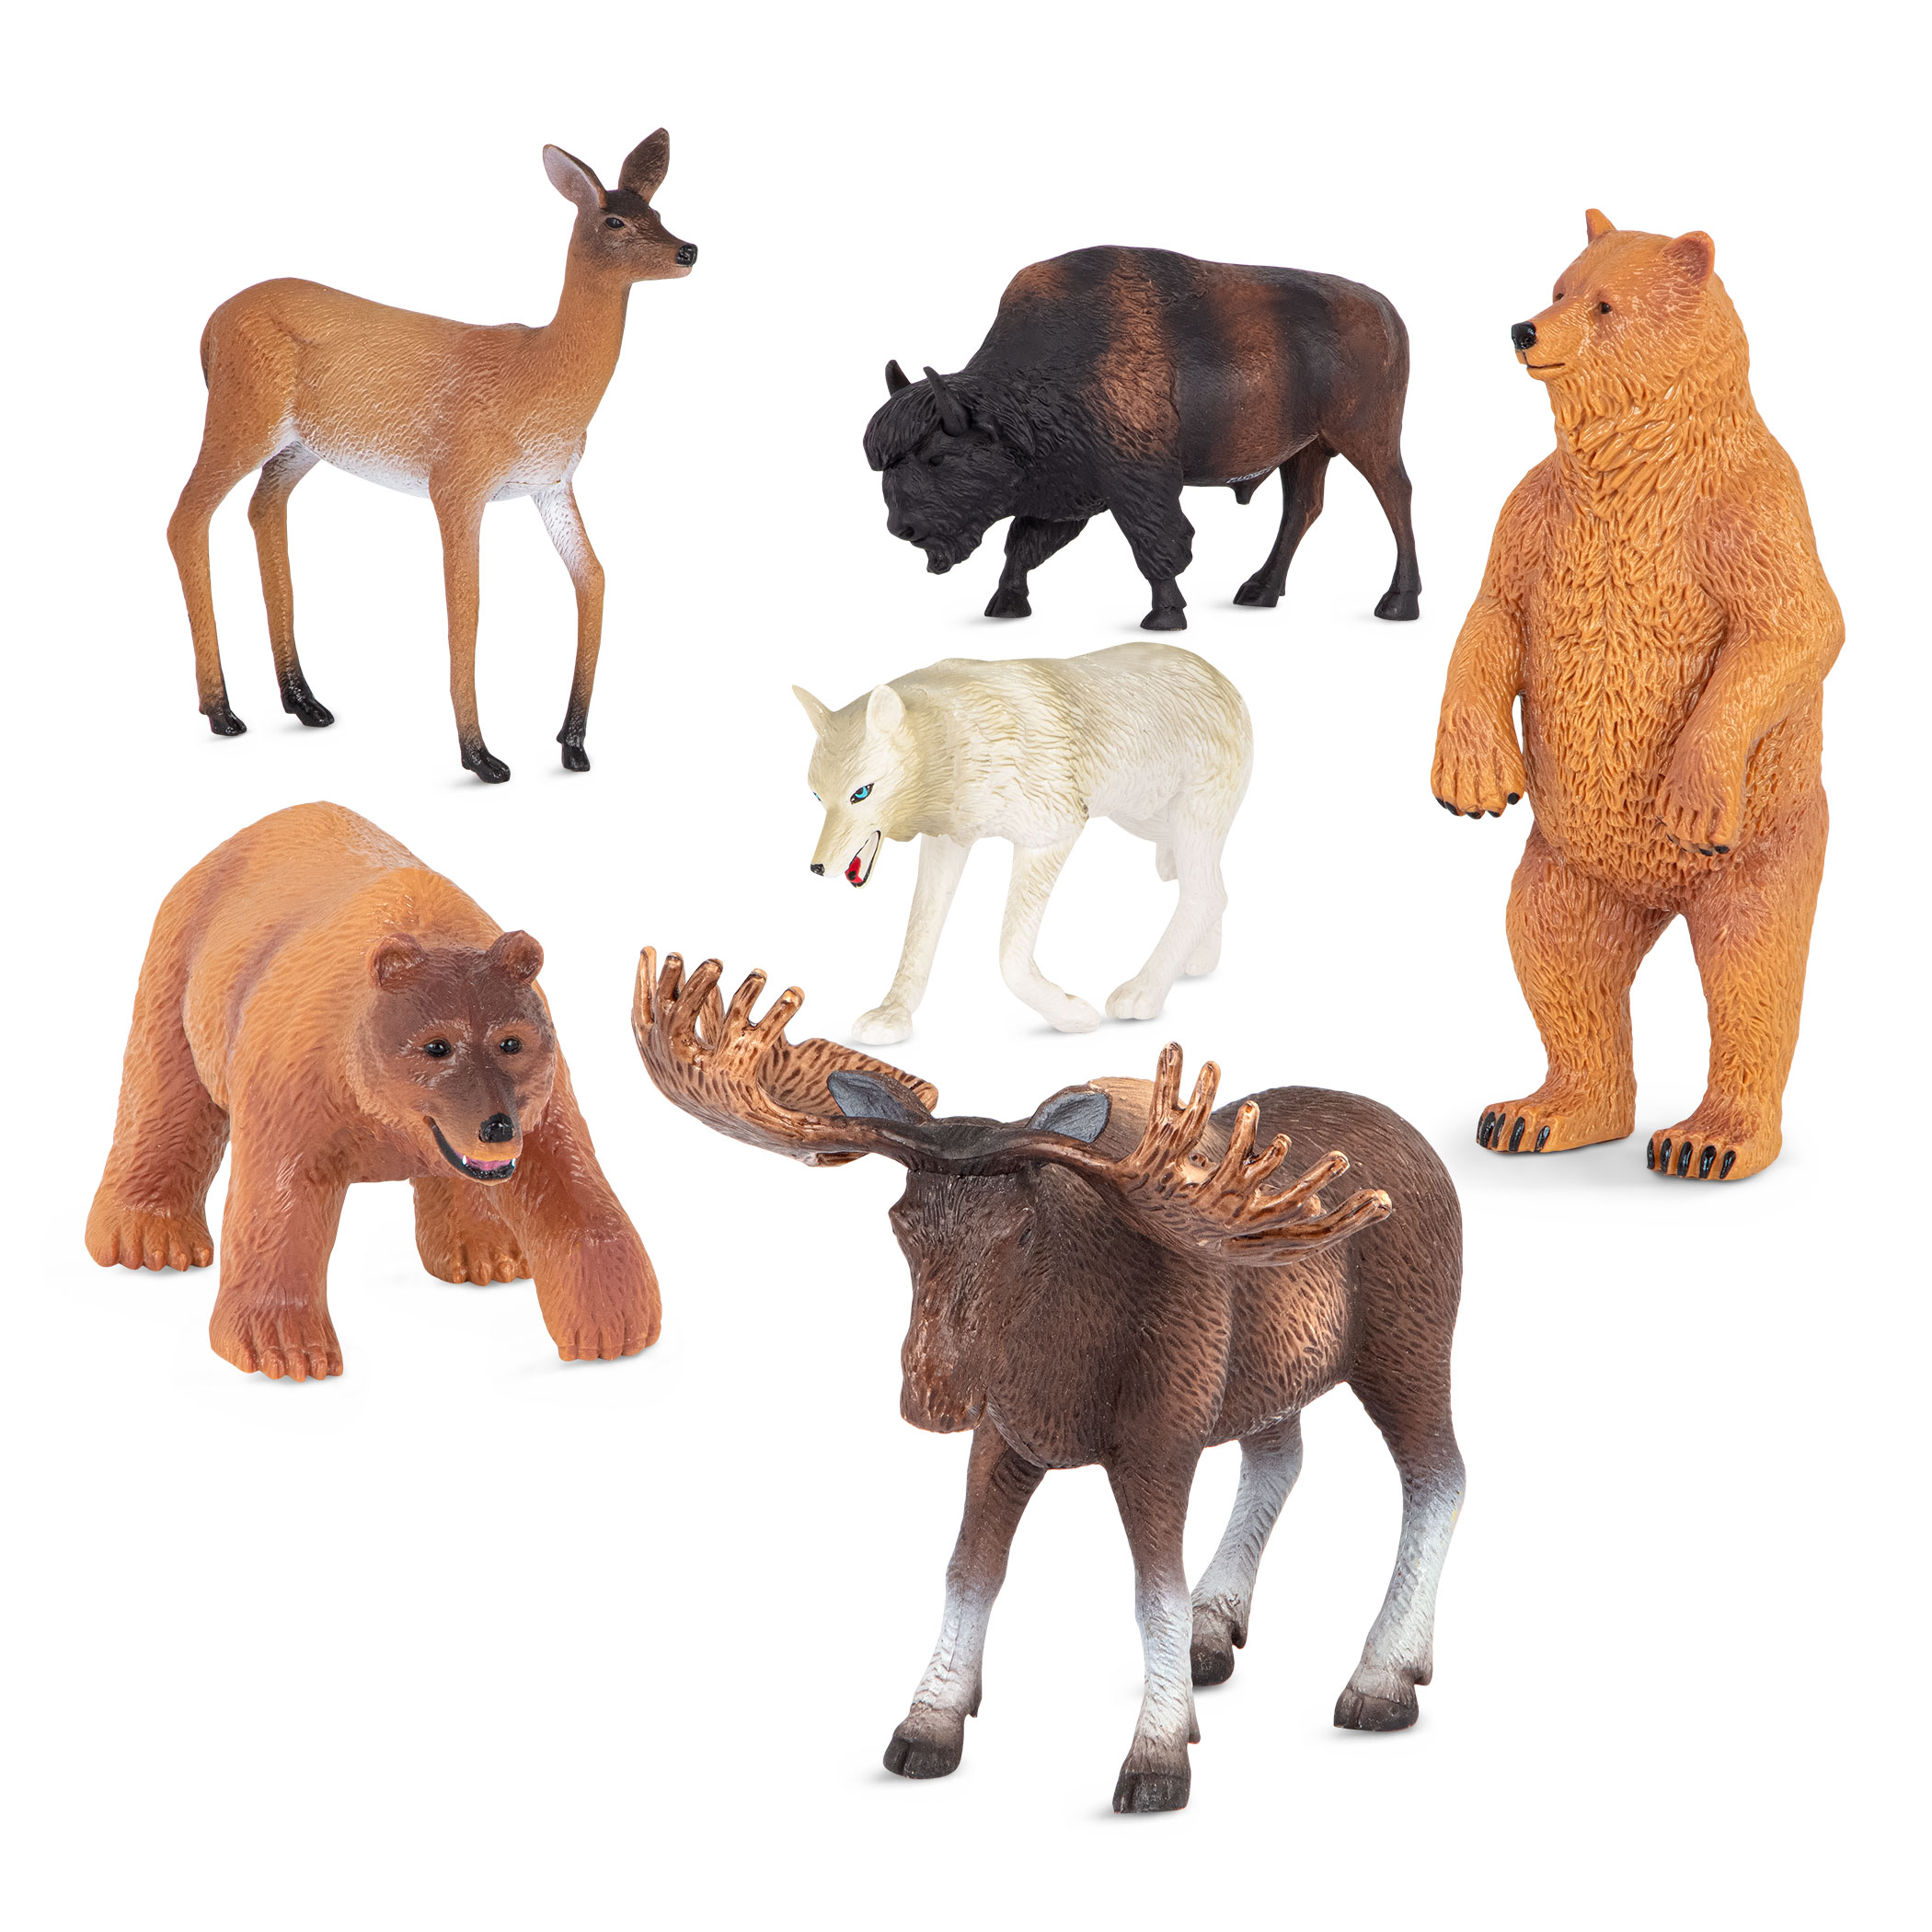 Terra North American Wild Animals  Forest Figures Play Set Toys Box by BATTAT 